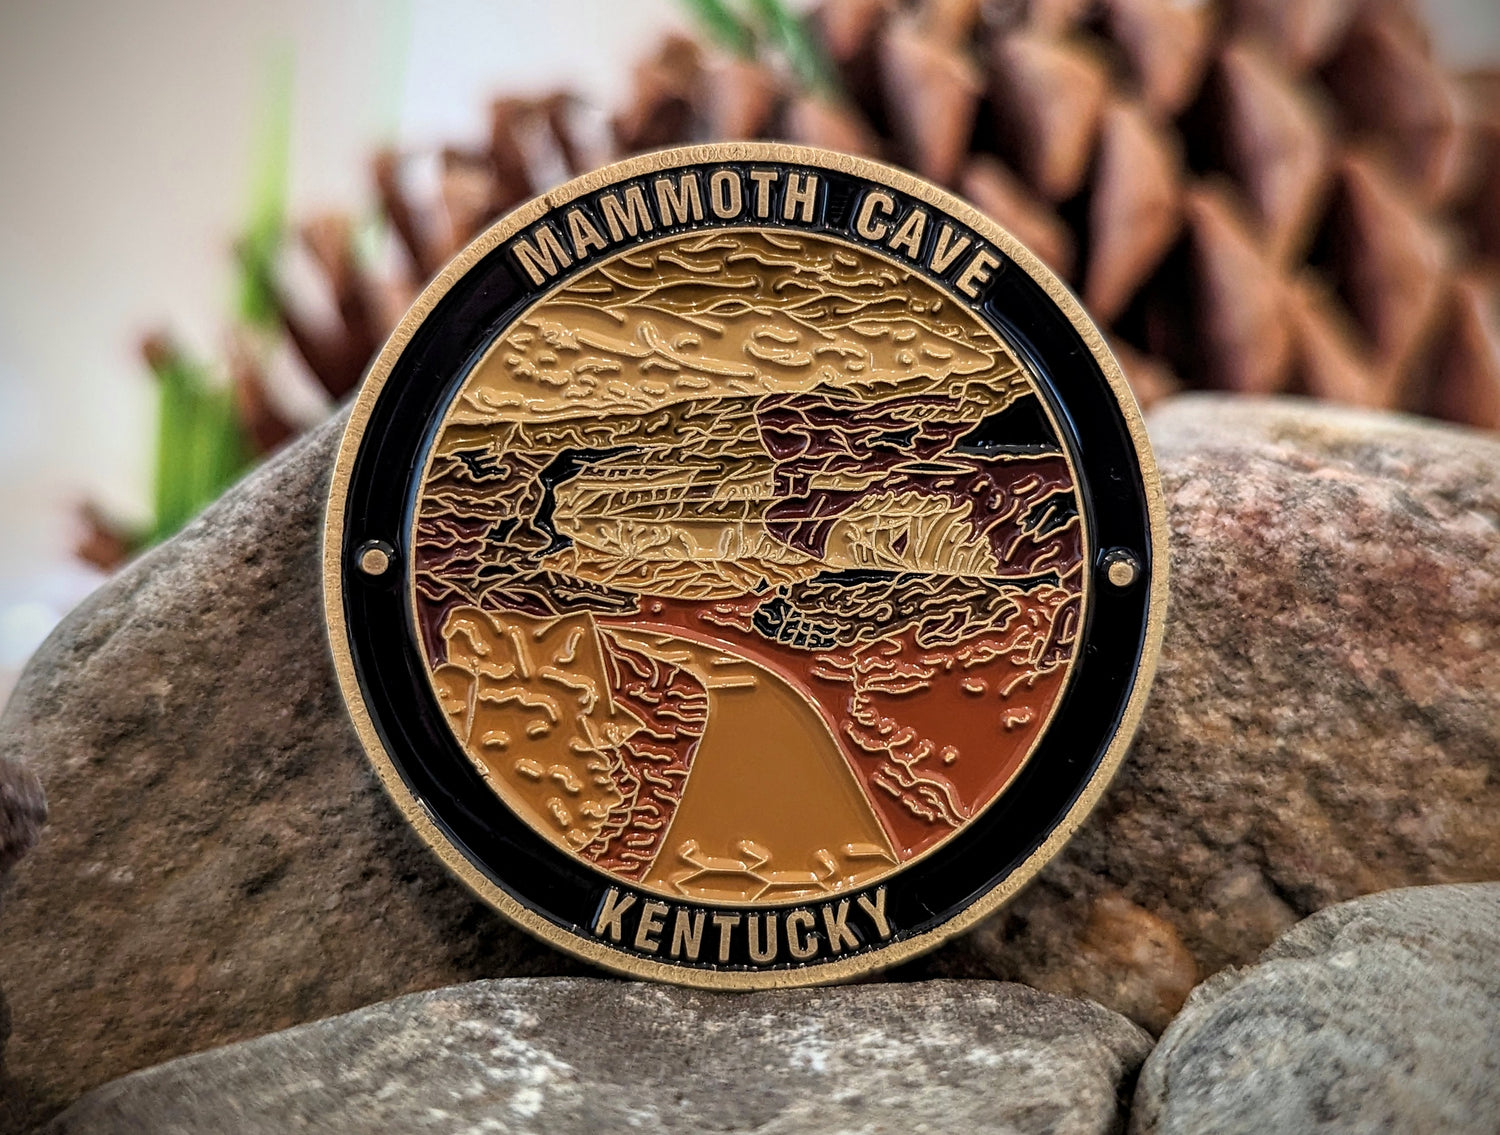 MAMMOTH CAVE NATIONAL PARK CHALLENGE COIN